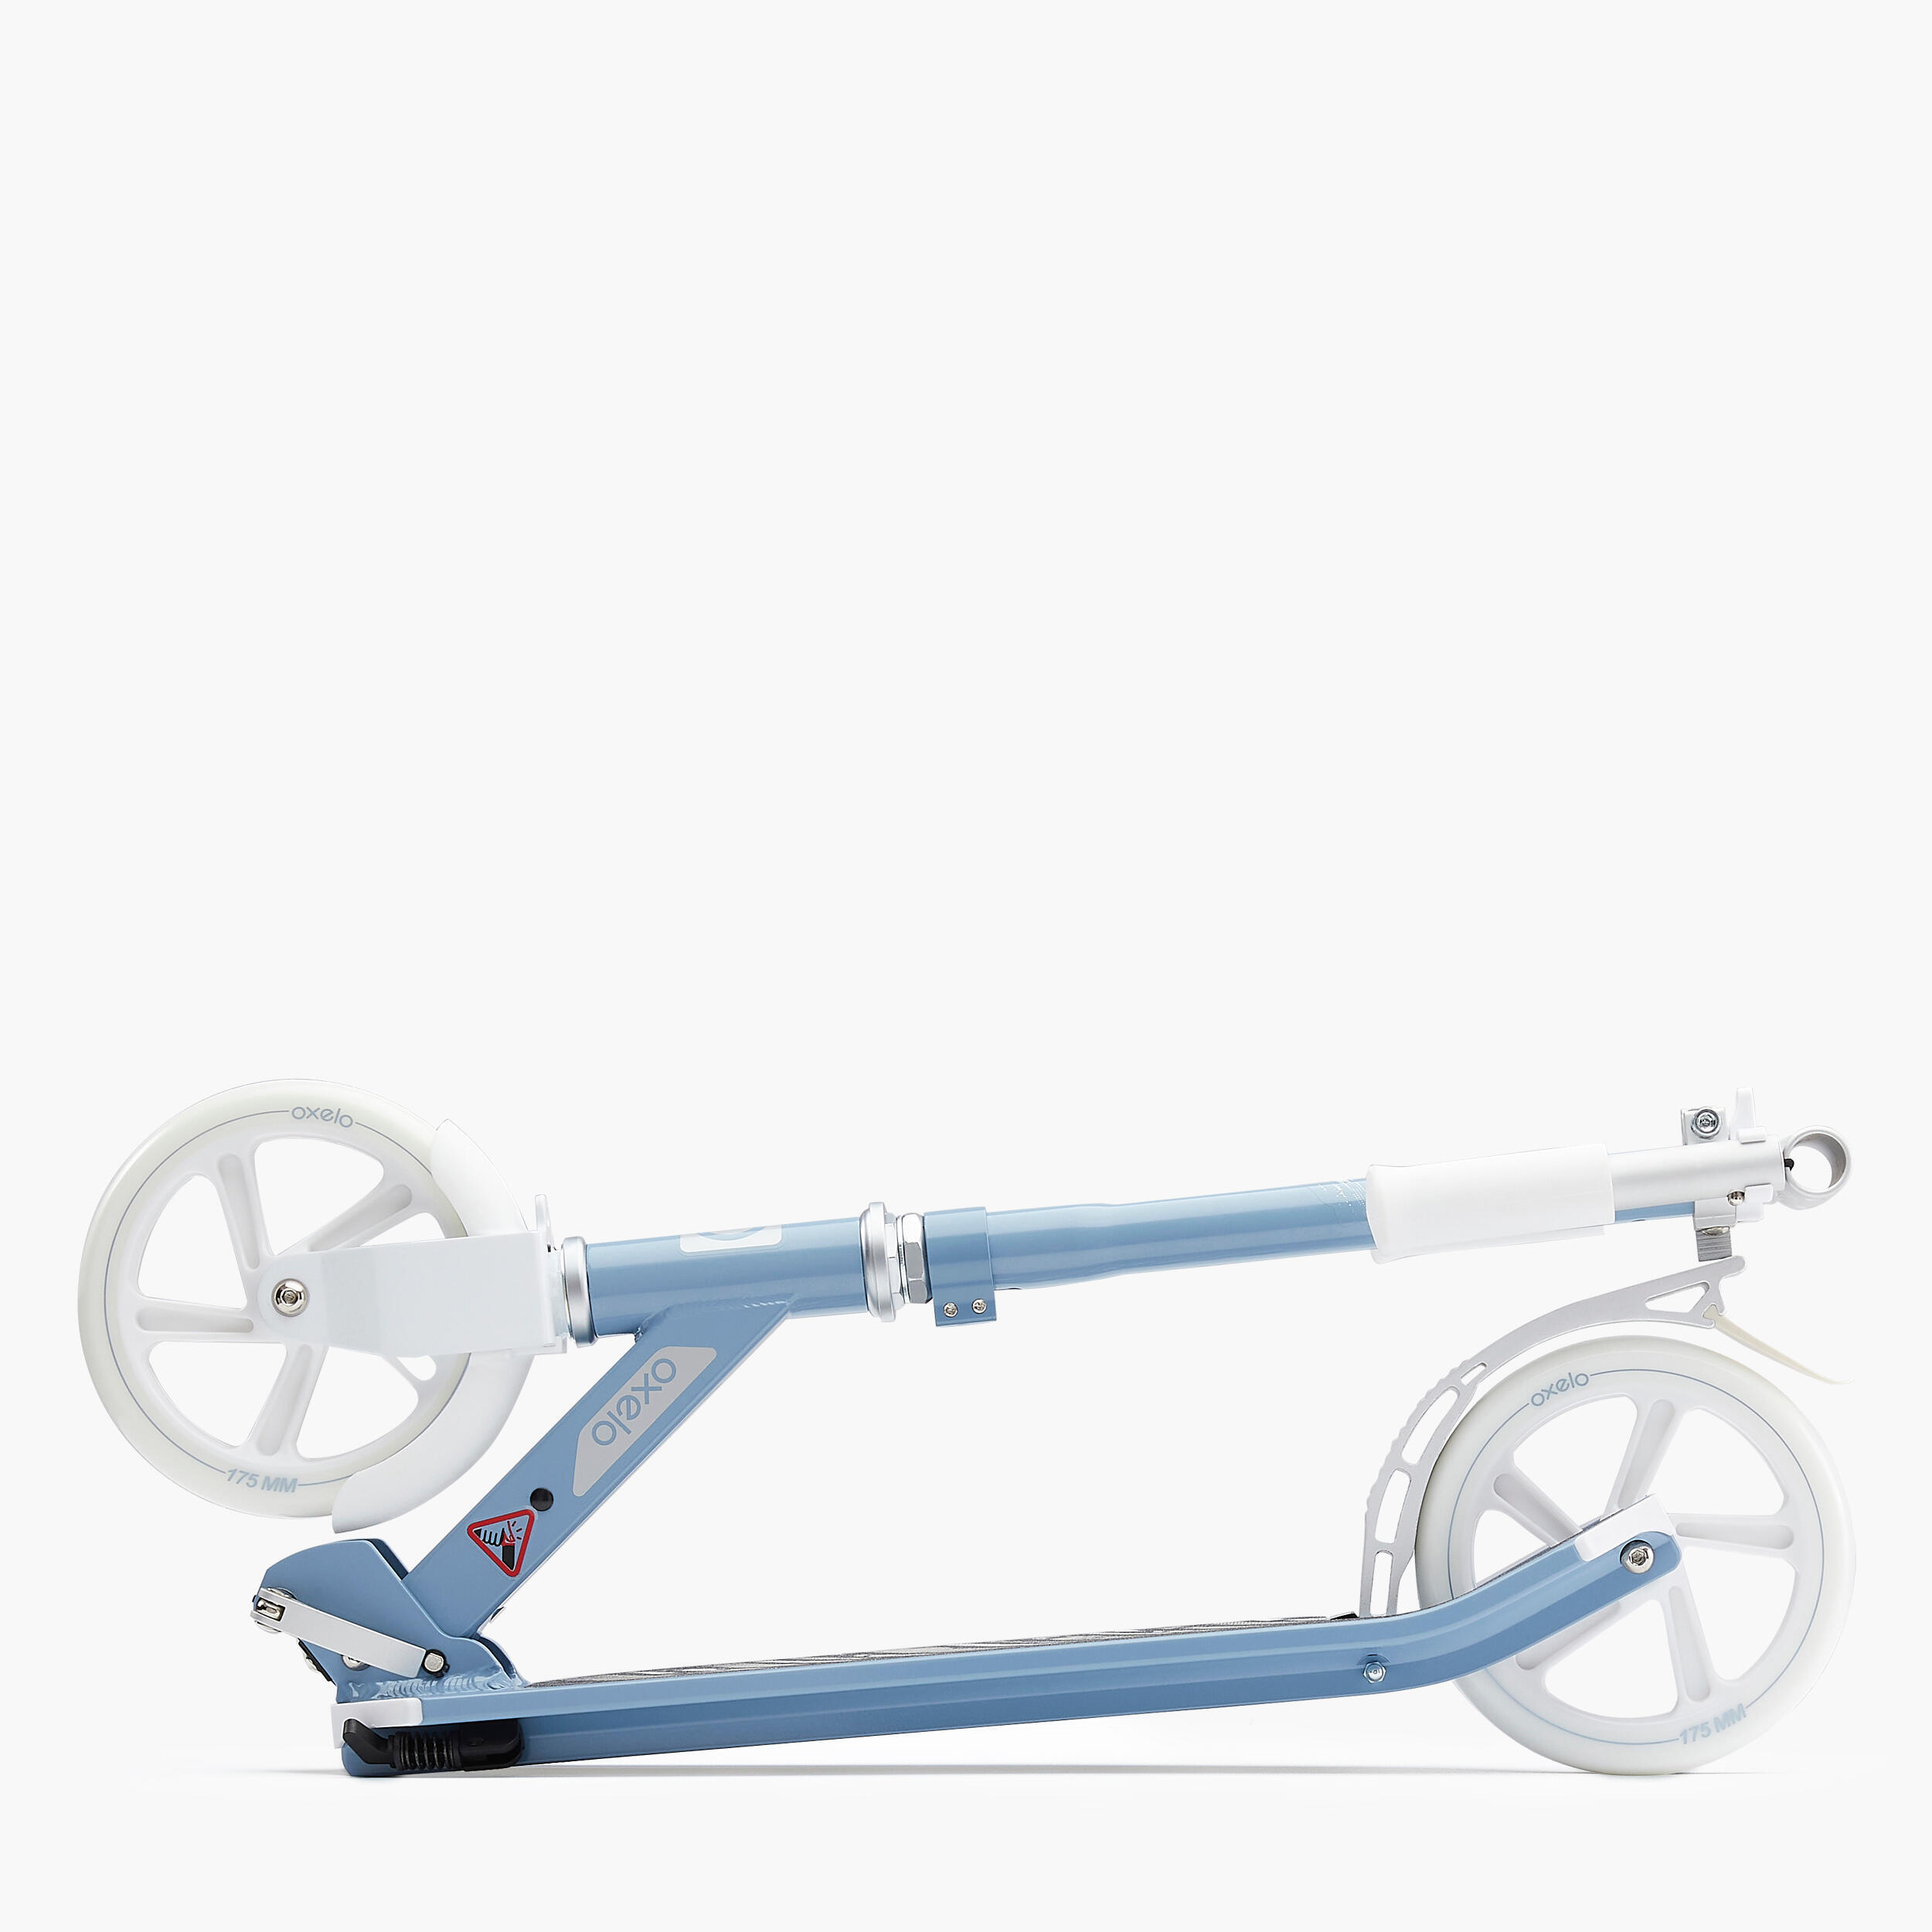 Scooter Mid 7 With Stand - Grey/Blue/White 2/8